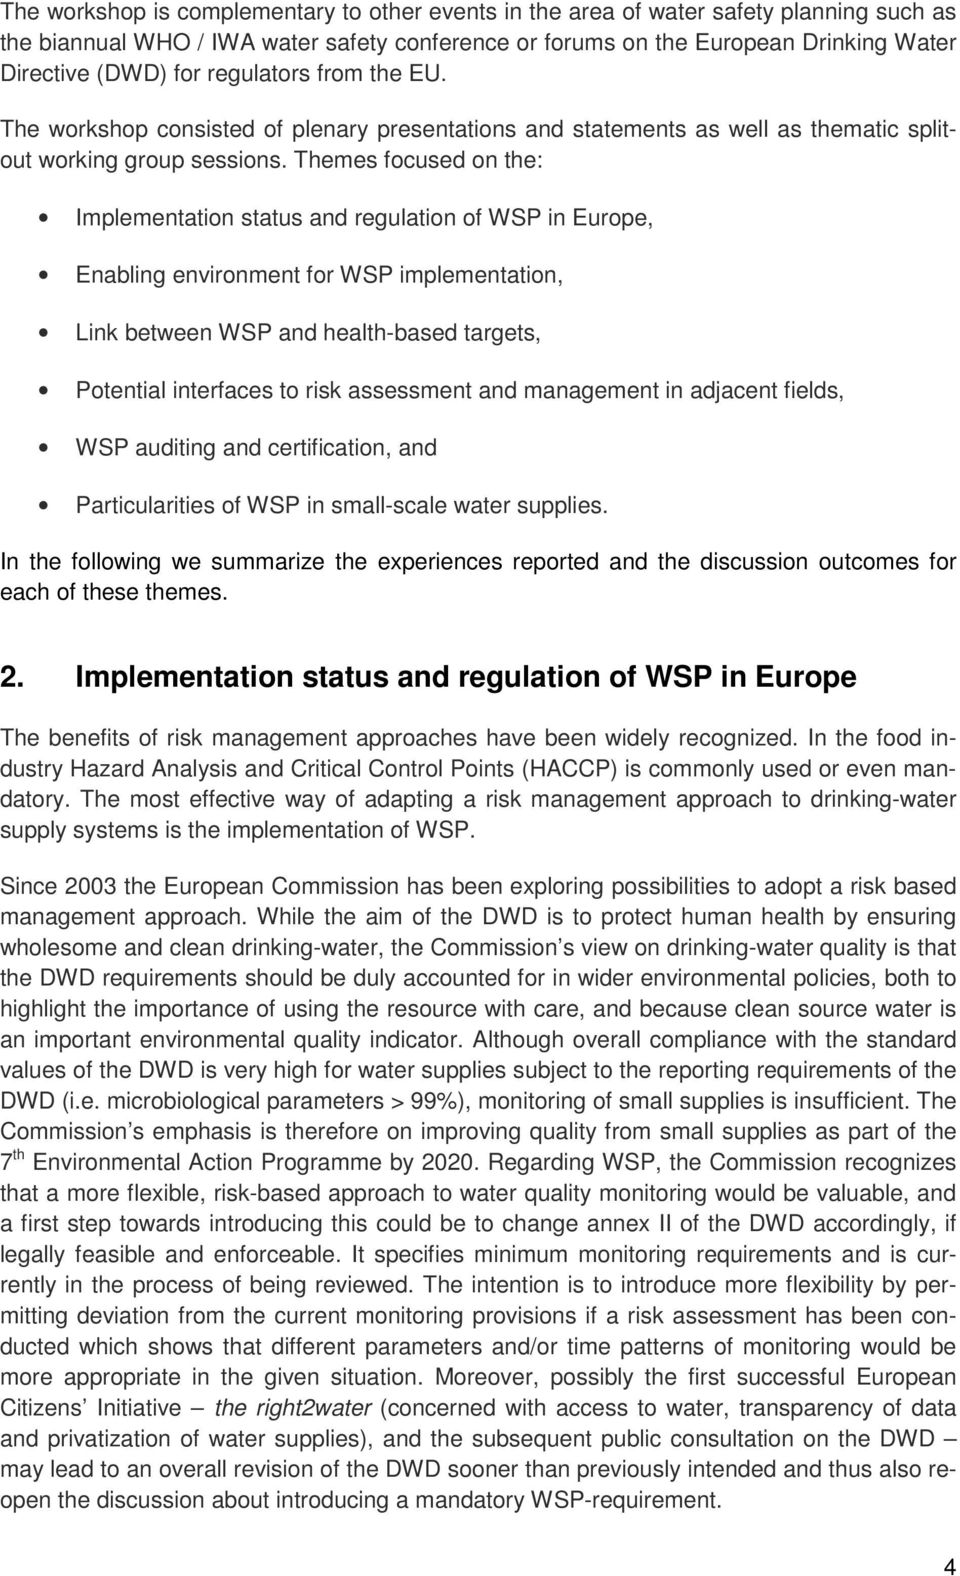 Themes focused on the: Implementation status and regulation of WSP in Europe, Enabling environment for WSP implementation, Link between WSP and health-based targets, Potential interfaces to risk